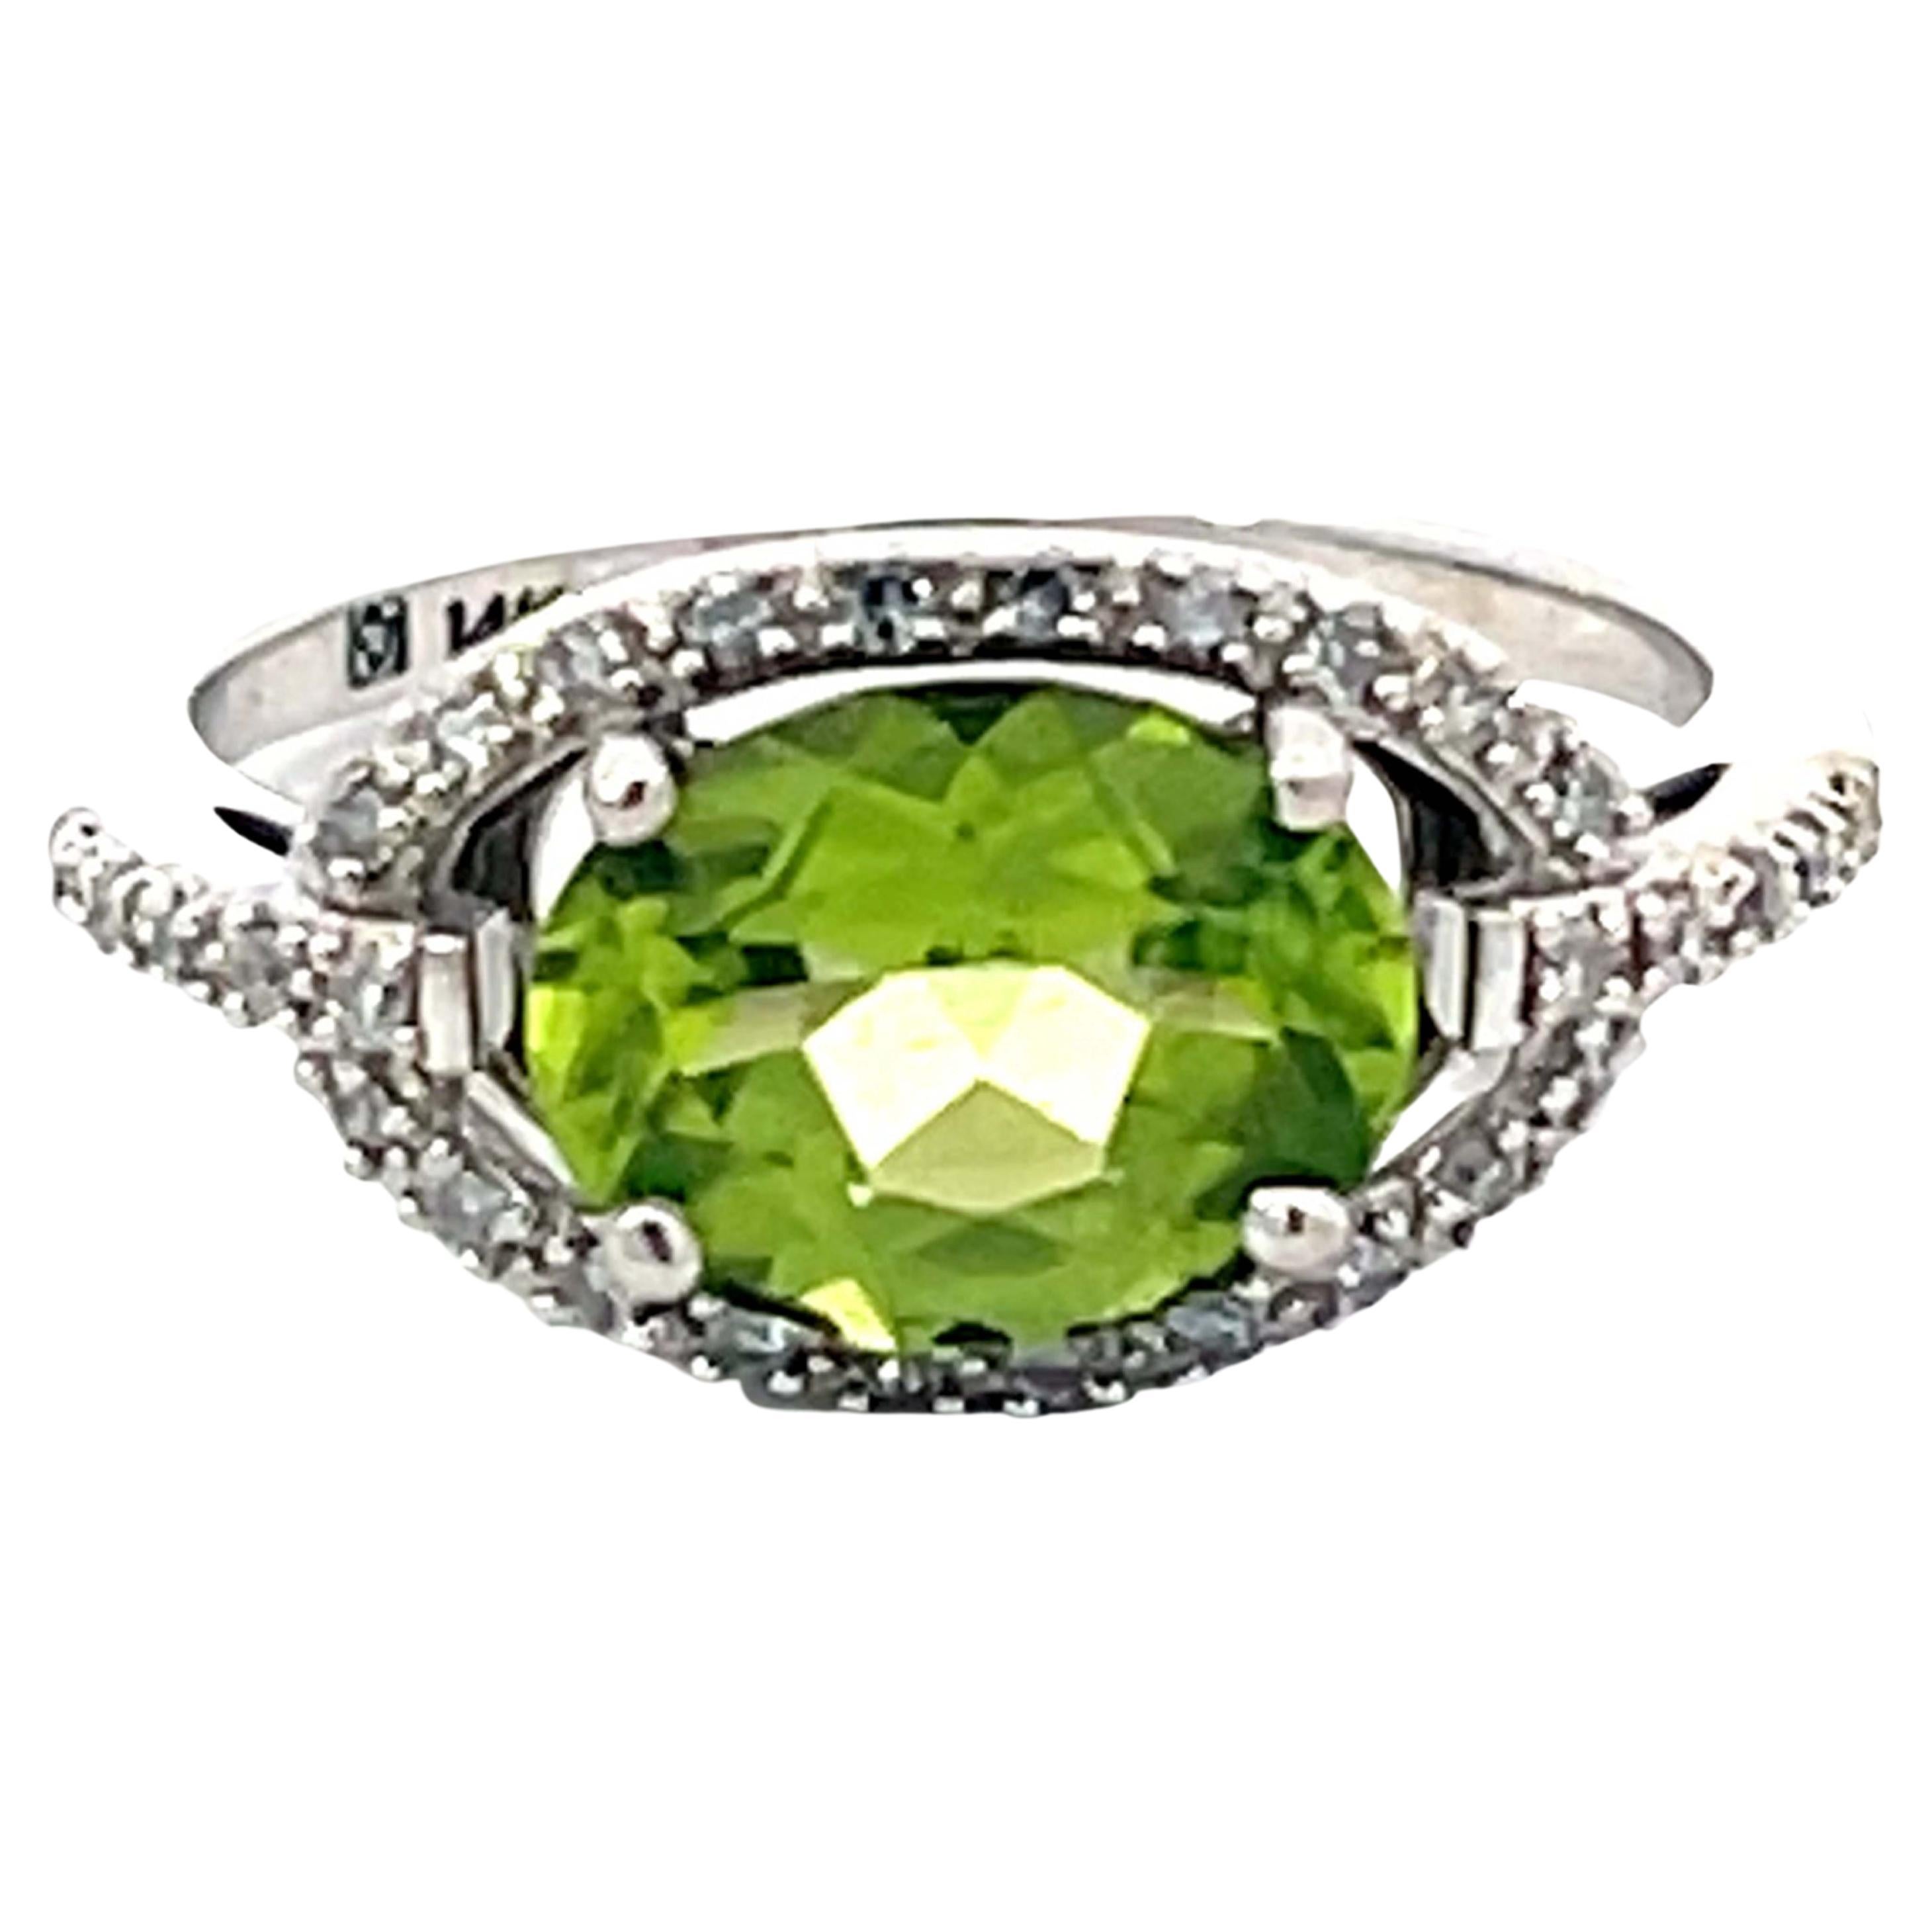 Oval Green Peridot and Diamond Halo Ring in 14k White Gold